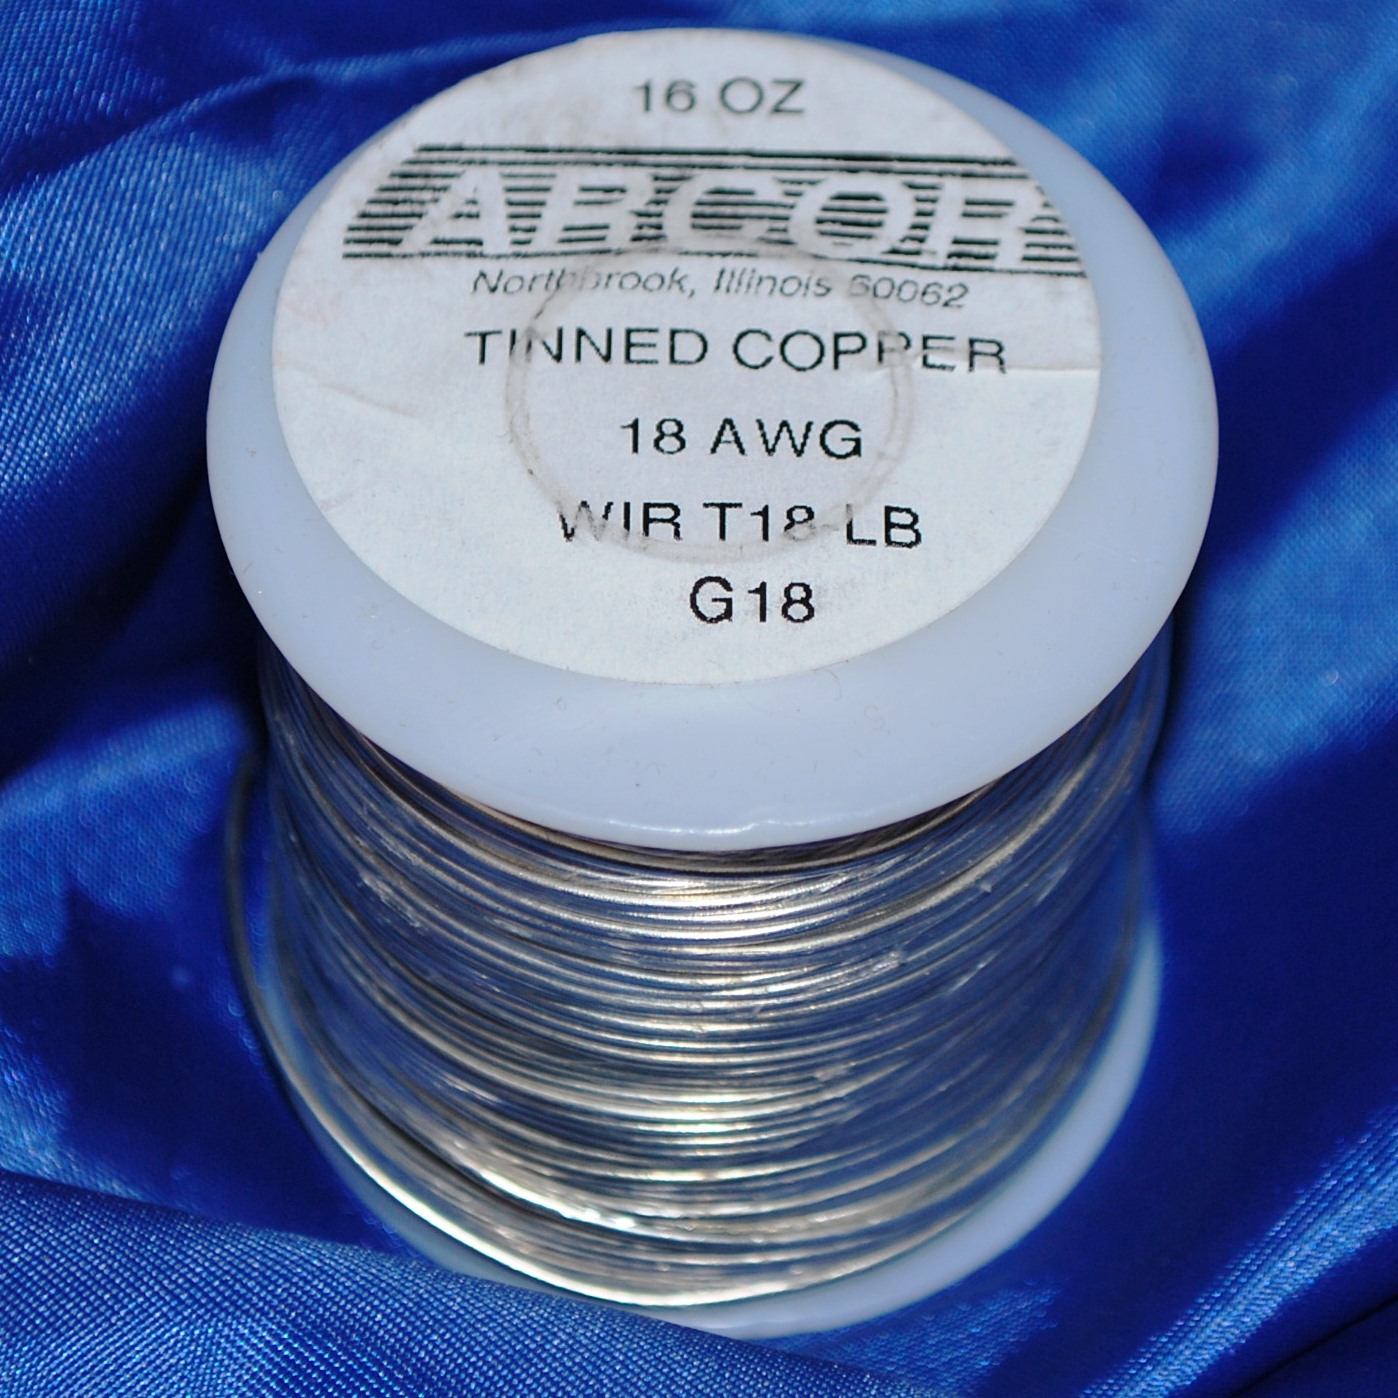 1 pound (16 oz) Tinned Copper Wire (silver color) 18 Gauge - 199